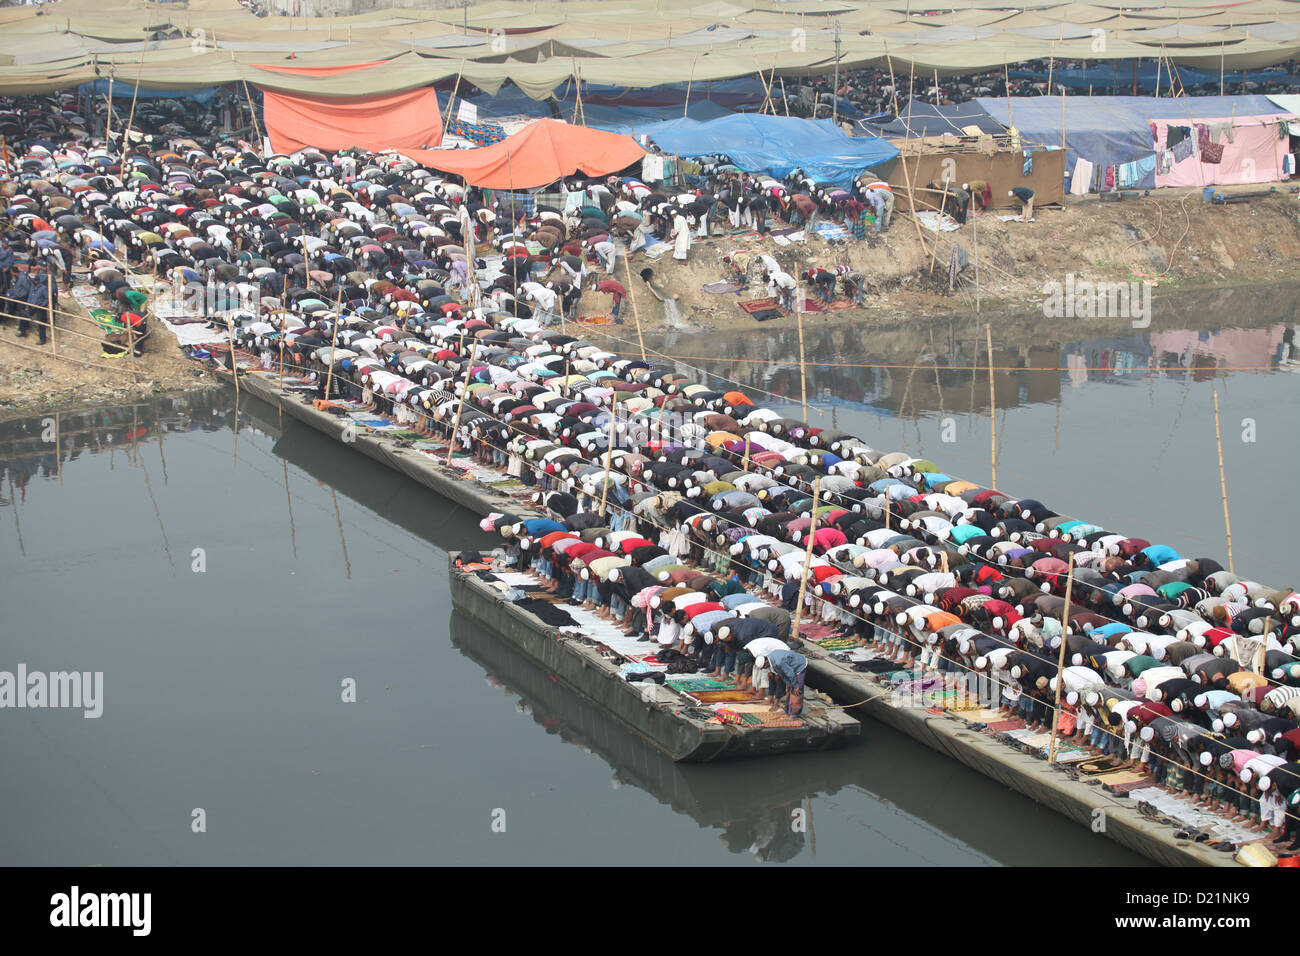 first phase of the Biswa Ijtema, one of the largest gatherings of Muslims in the world, begins on the banks of the Turag river Stock Photo